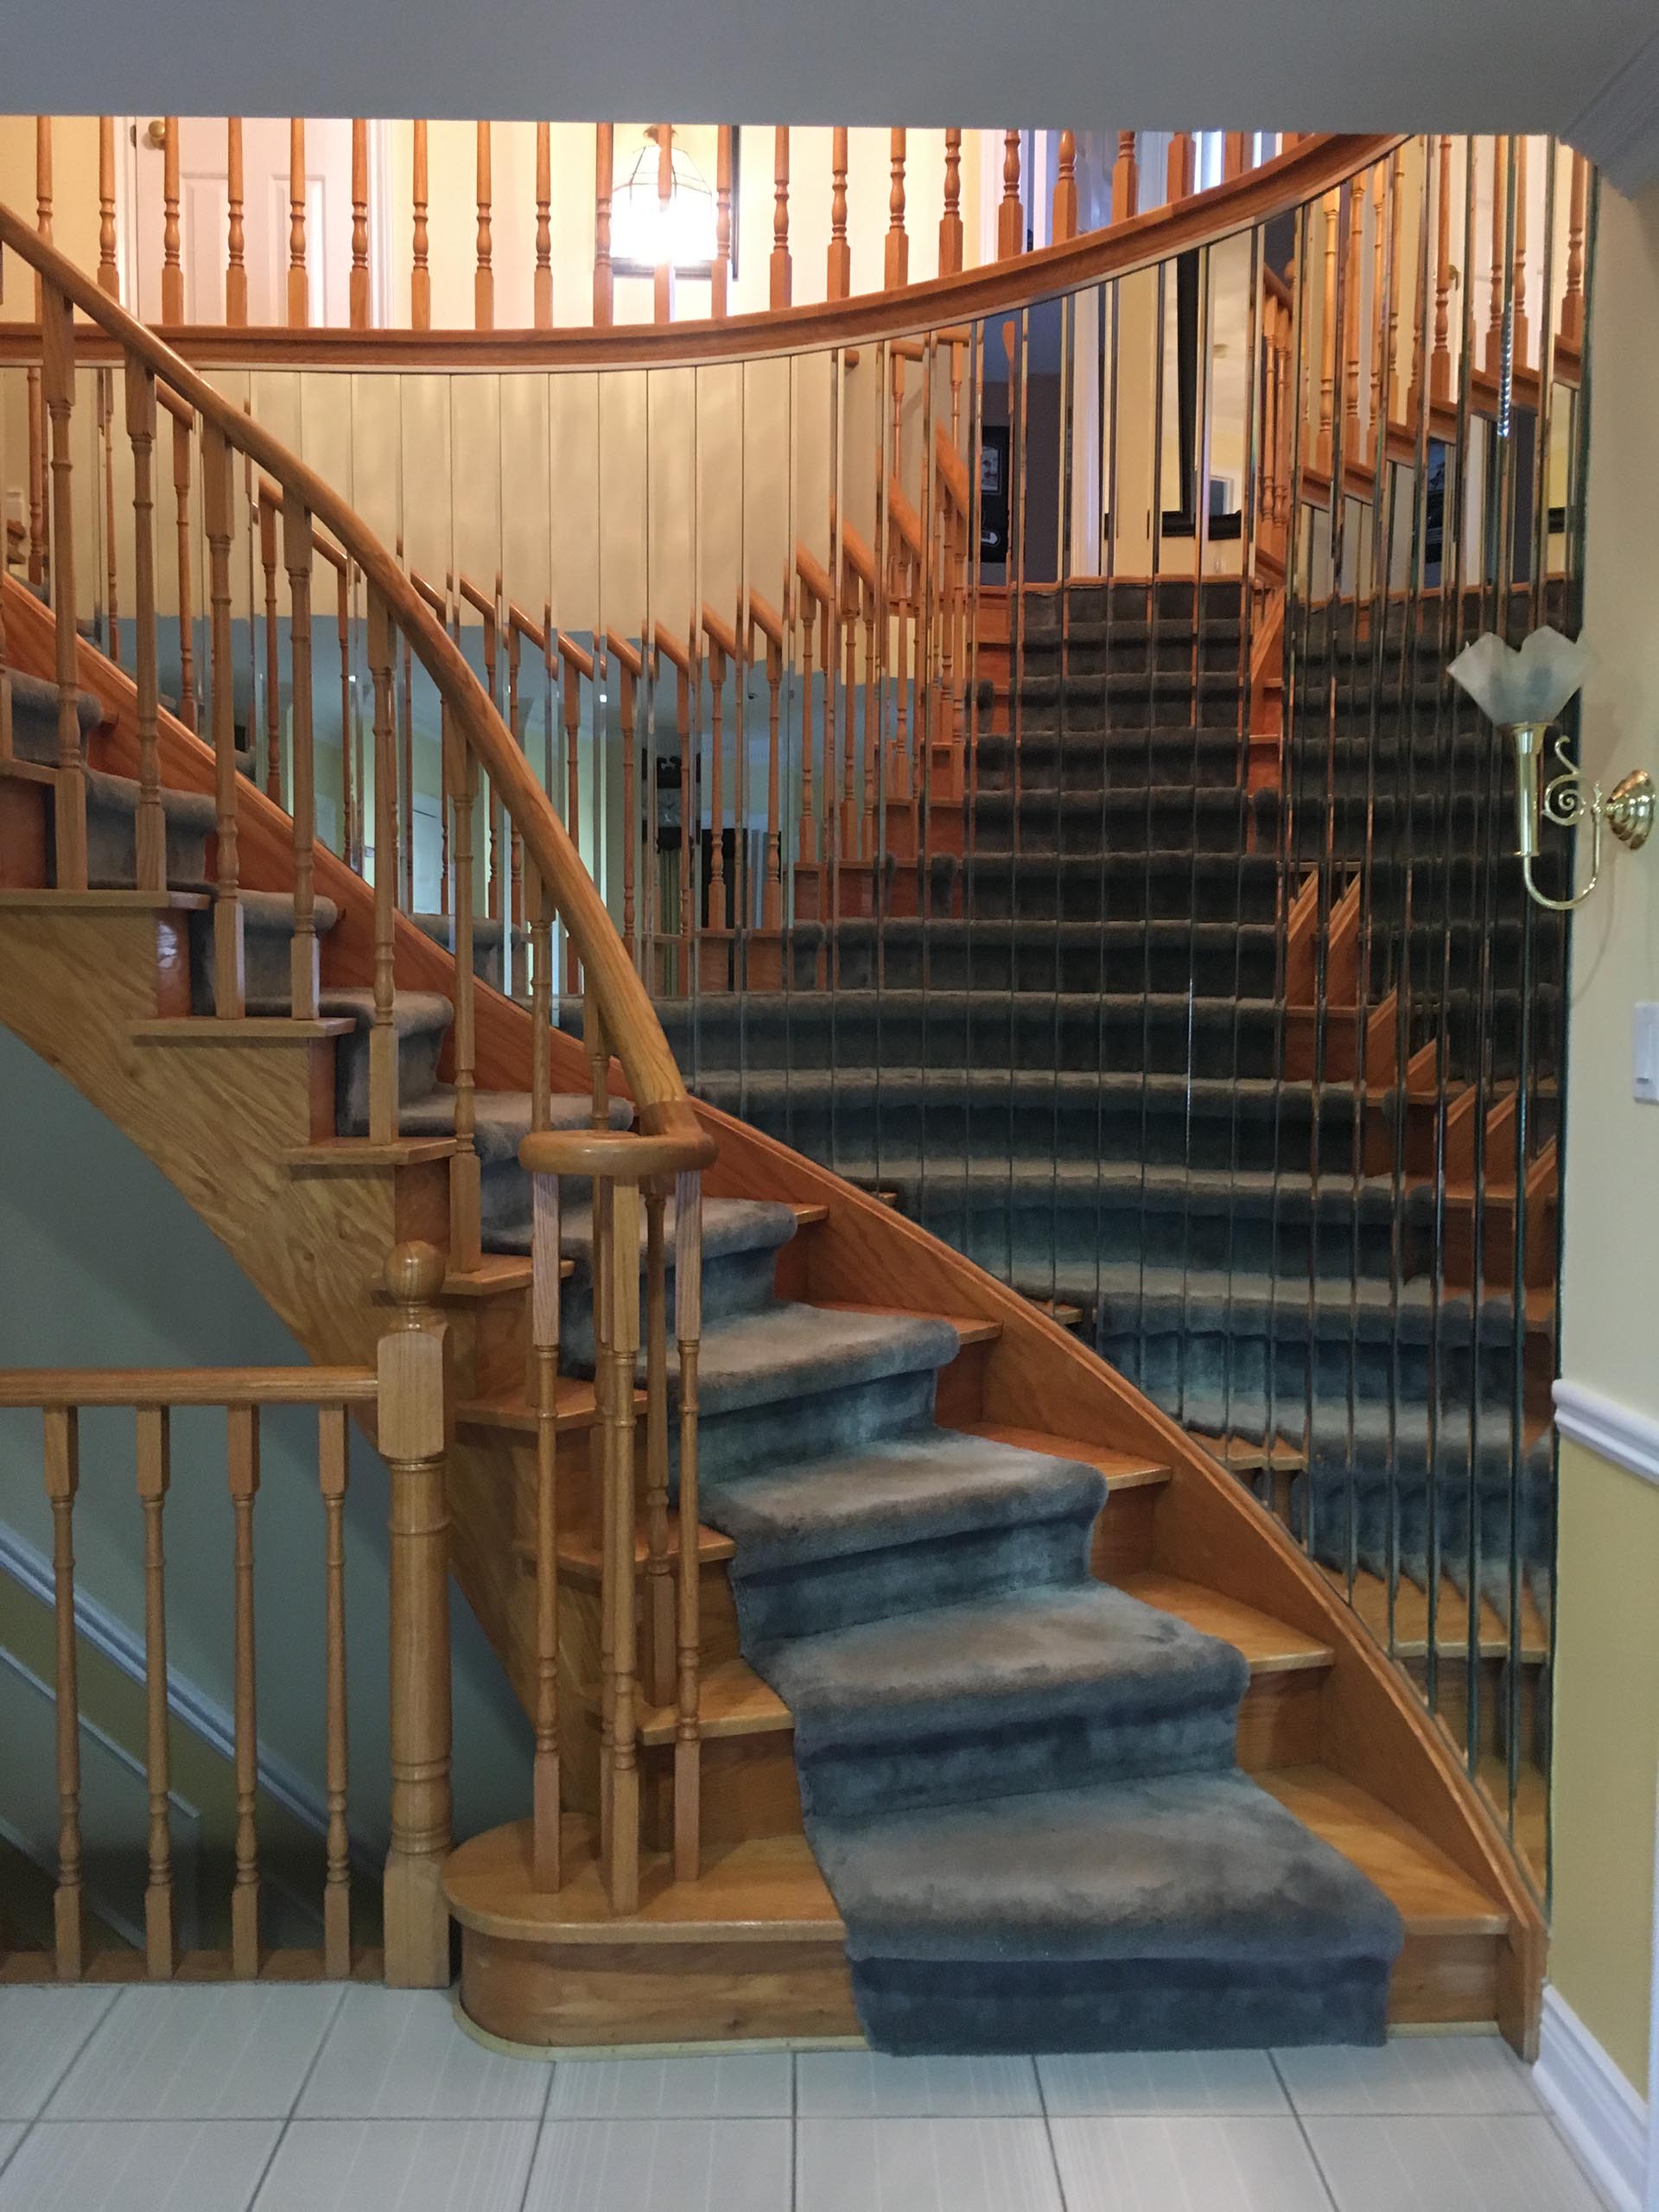 A 1970s staircase with a curved design and mirrored wall.